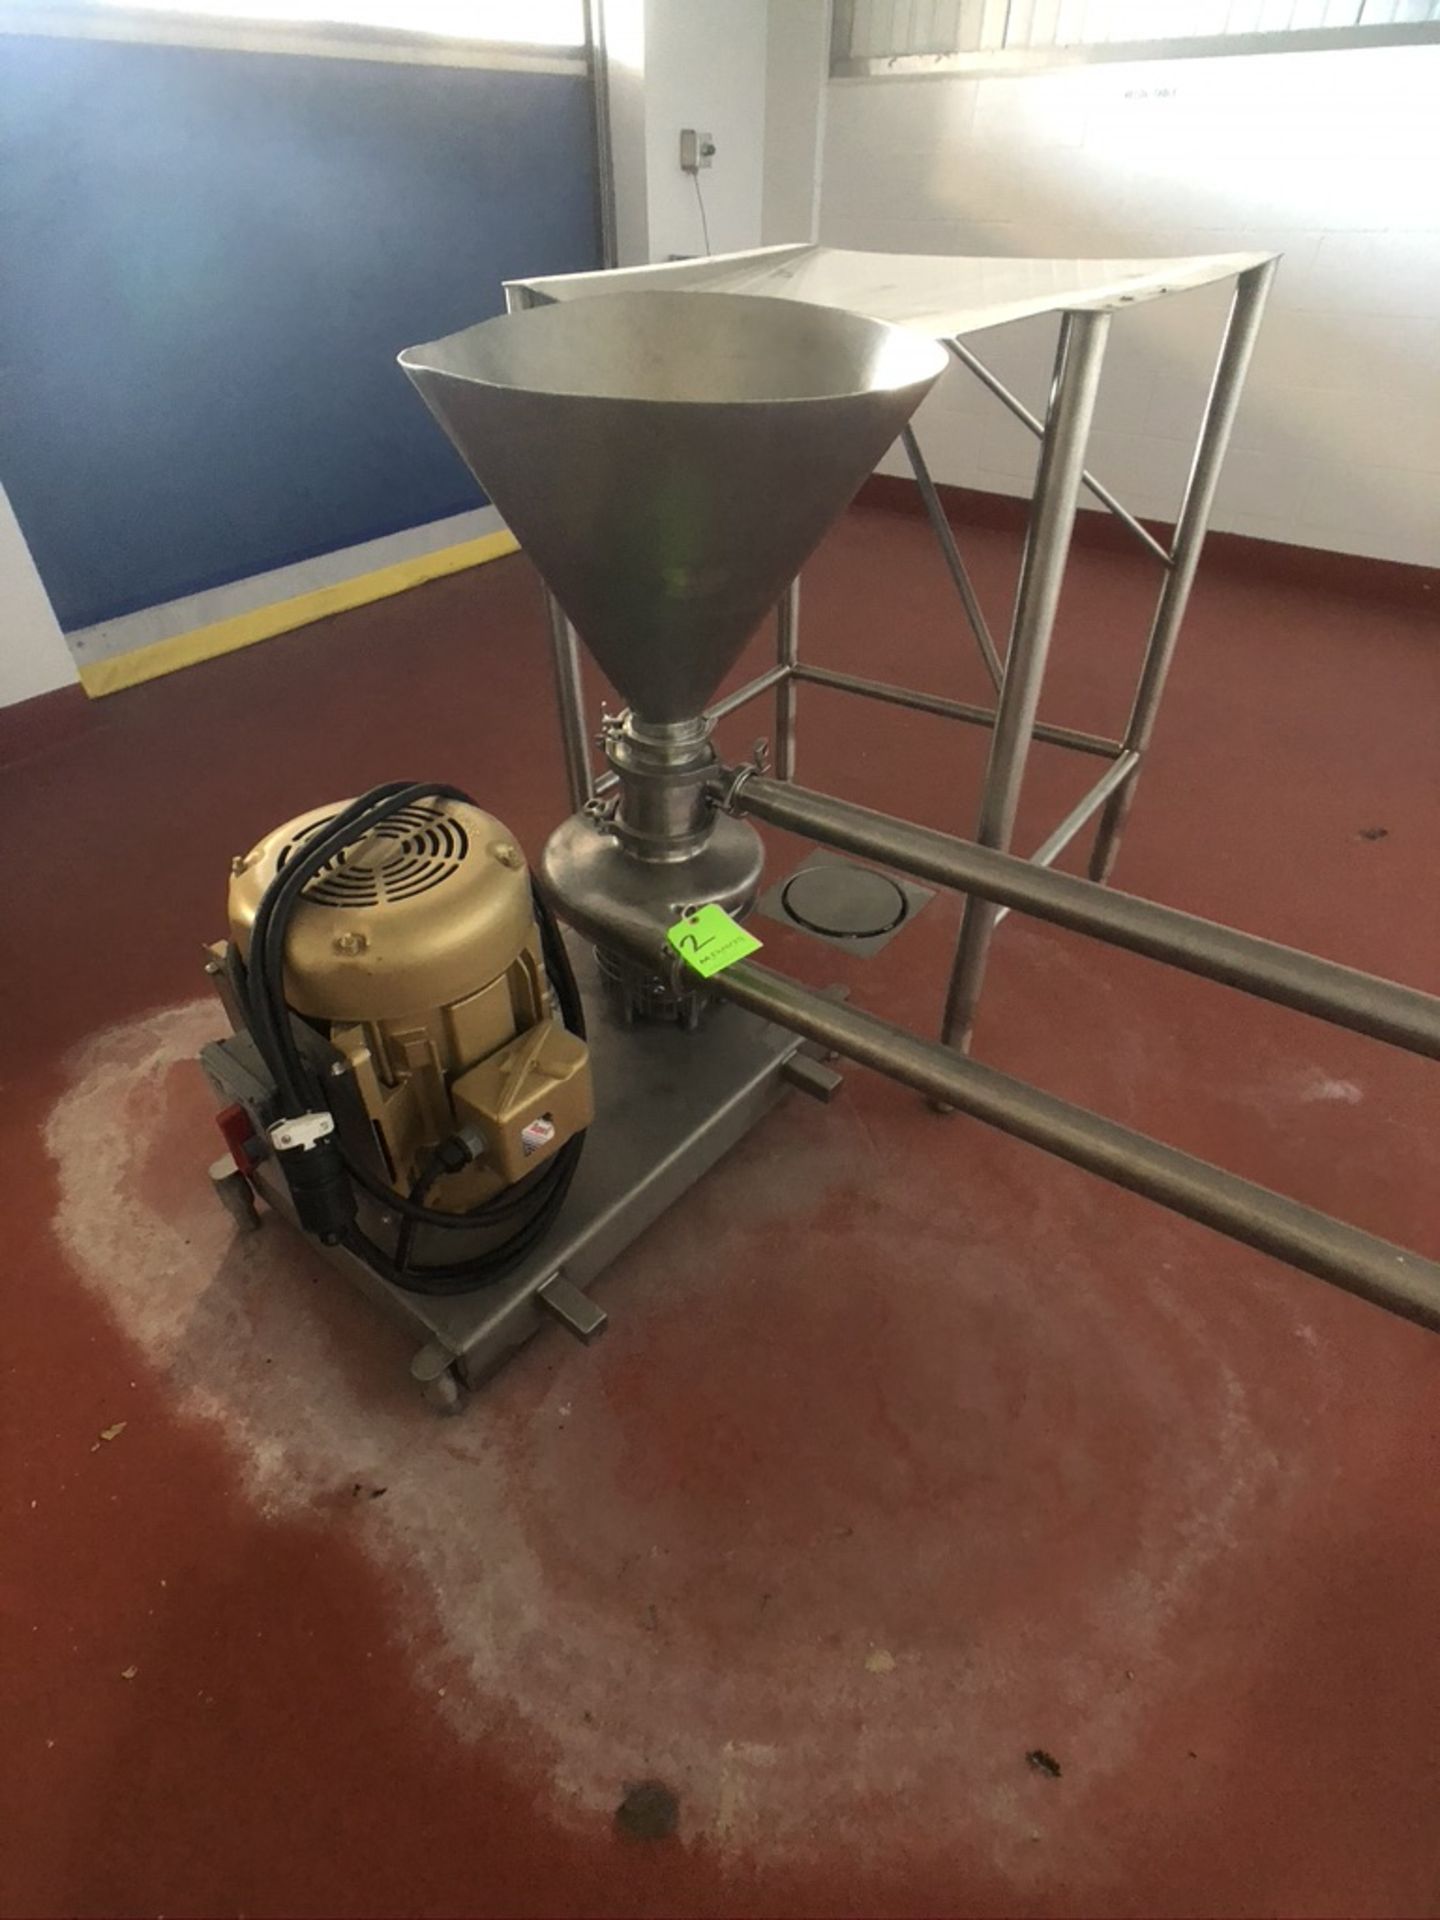 TRI-CLOVER / TRI-BLENDER, MODEL F4329MD-B40, S/N W2229, EQUIPPED WITH BALDOR MOTOR 20 HP 3520 RPM, - Image 4 of 13